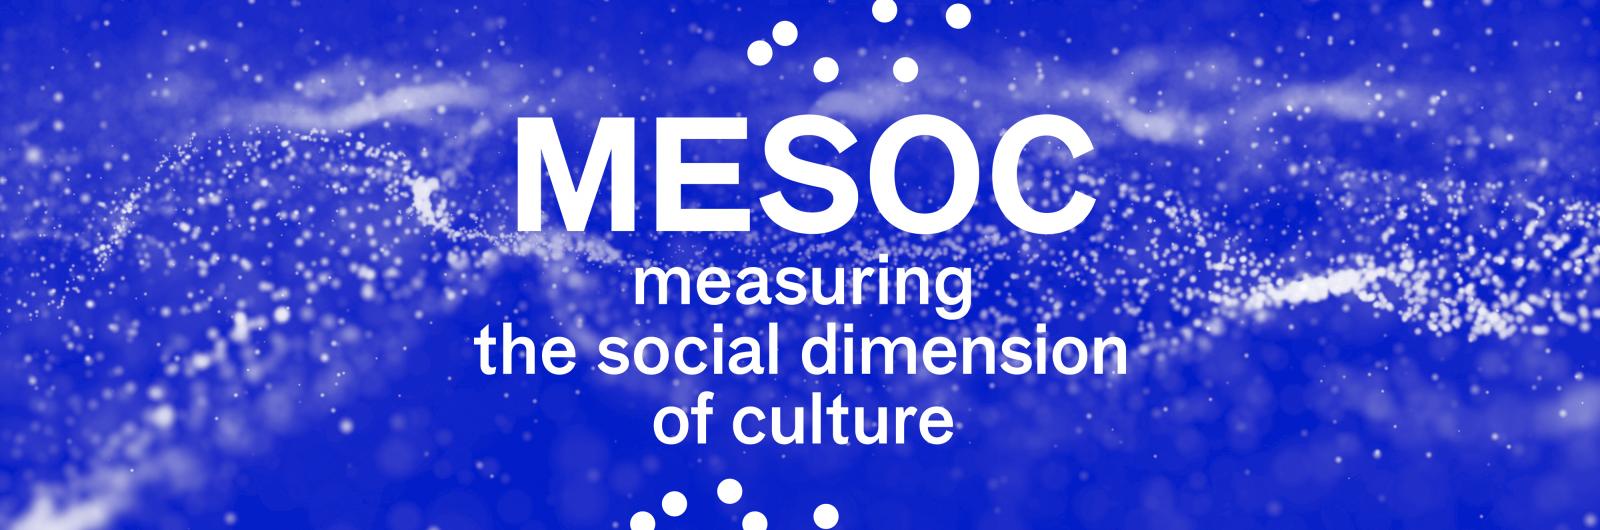 MESOC - measuring the social dimension of culture